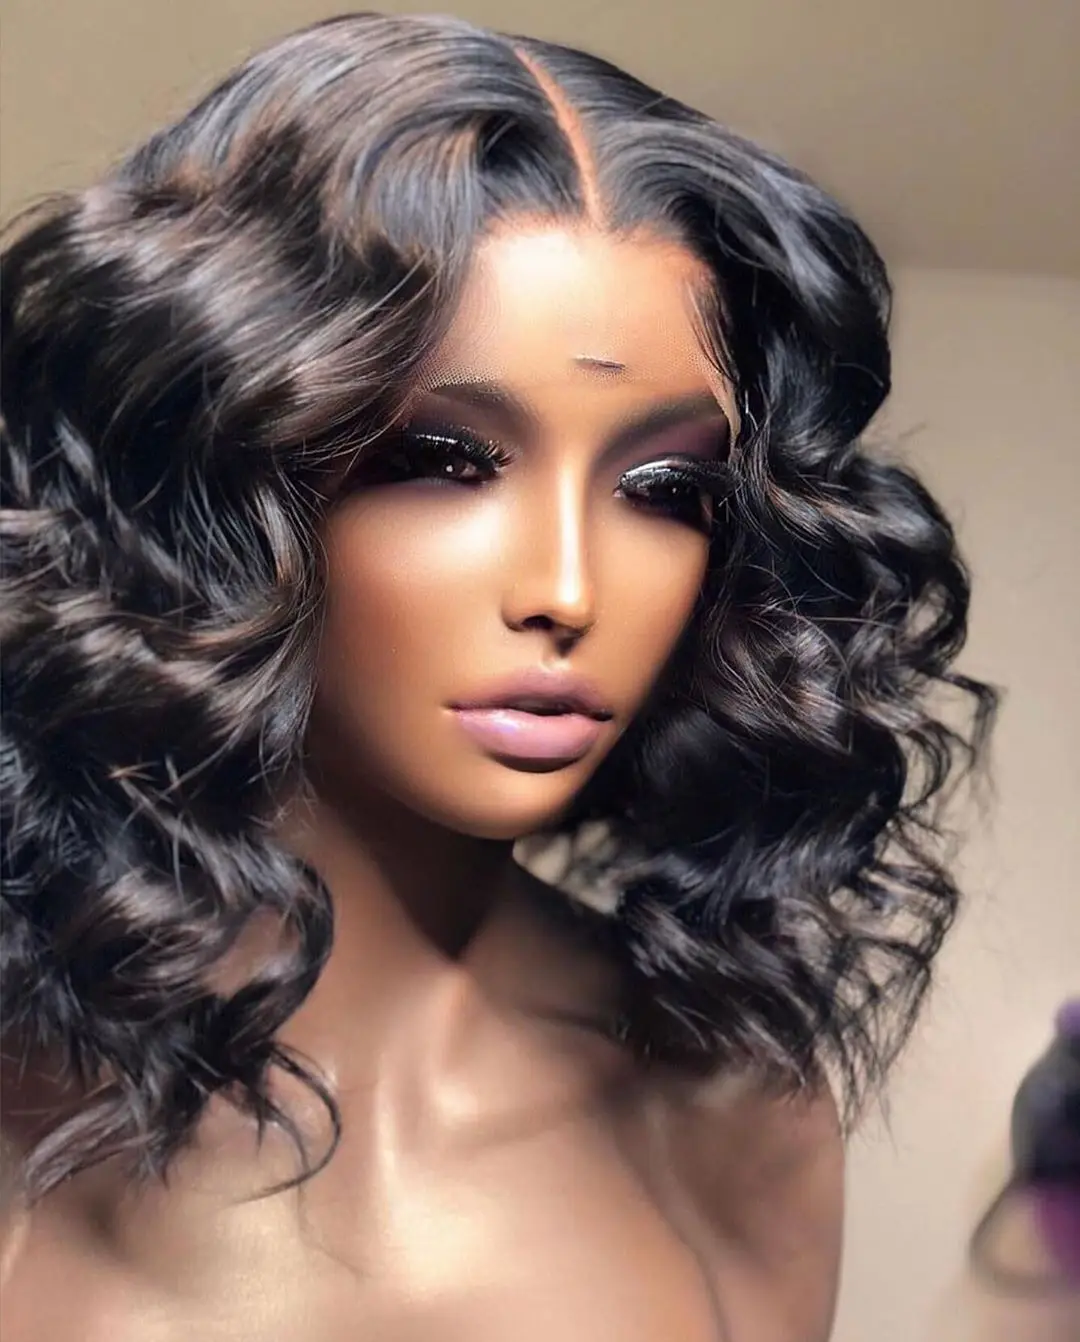 

Lace Front Human Hair Wigs 150% Density HD Frontal Wig Human Hair Bob Wigs Body Wave Wavy Addictive Short Loose for Black Women